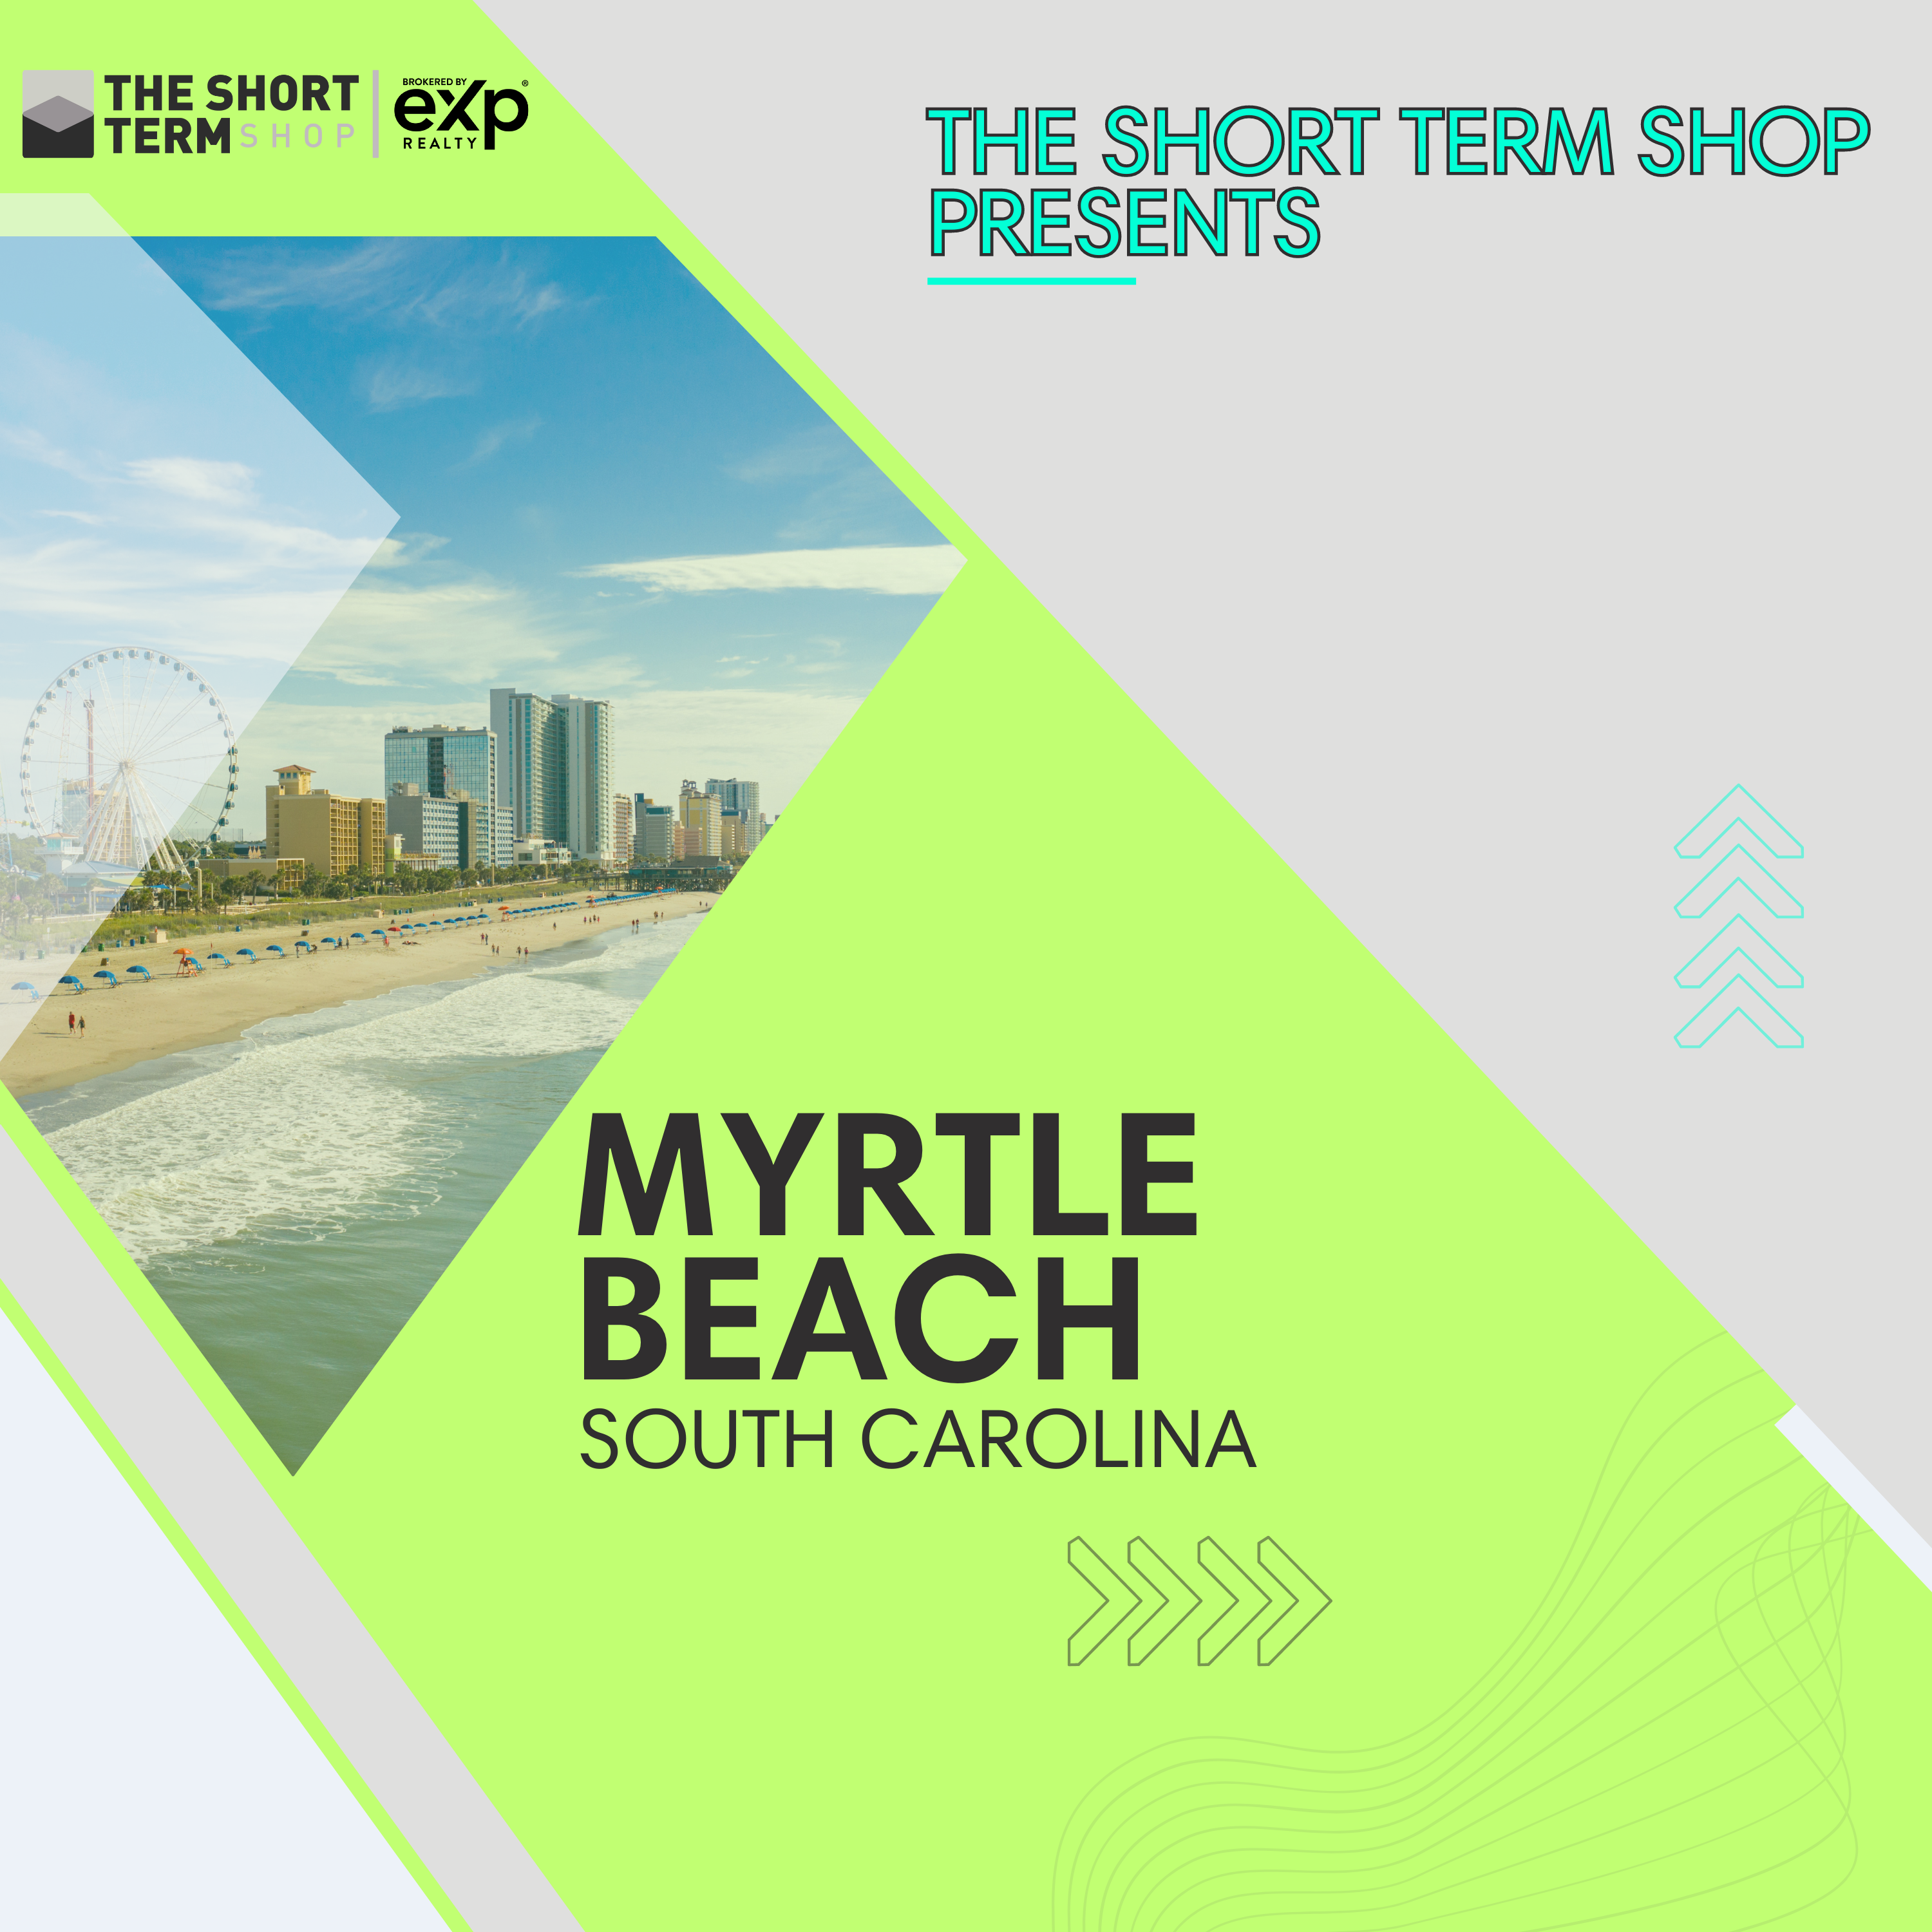 The Real Estate Contract Process When Investing In Short Term Rentals In Myrtle Beach, SC